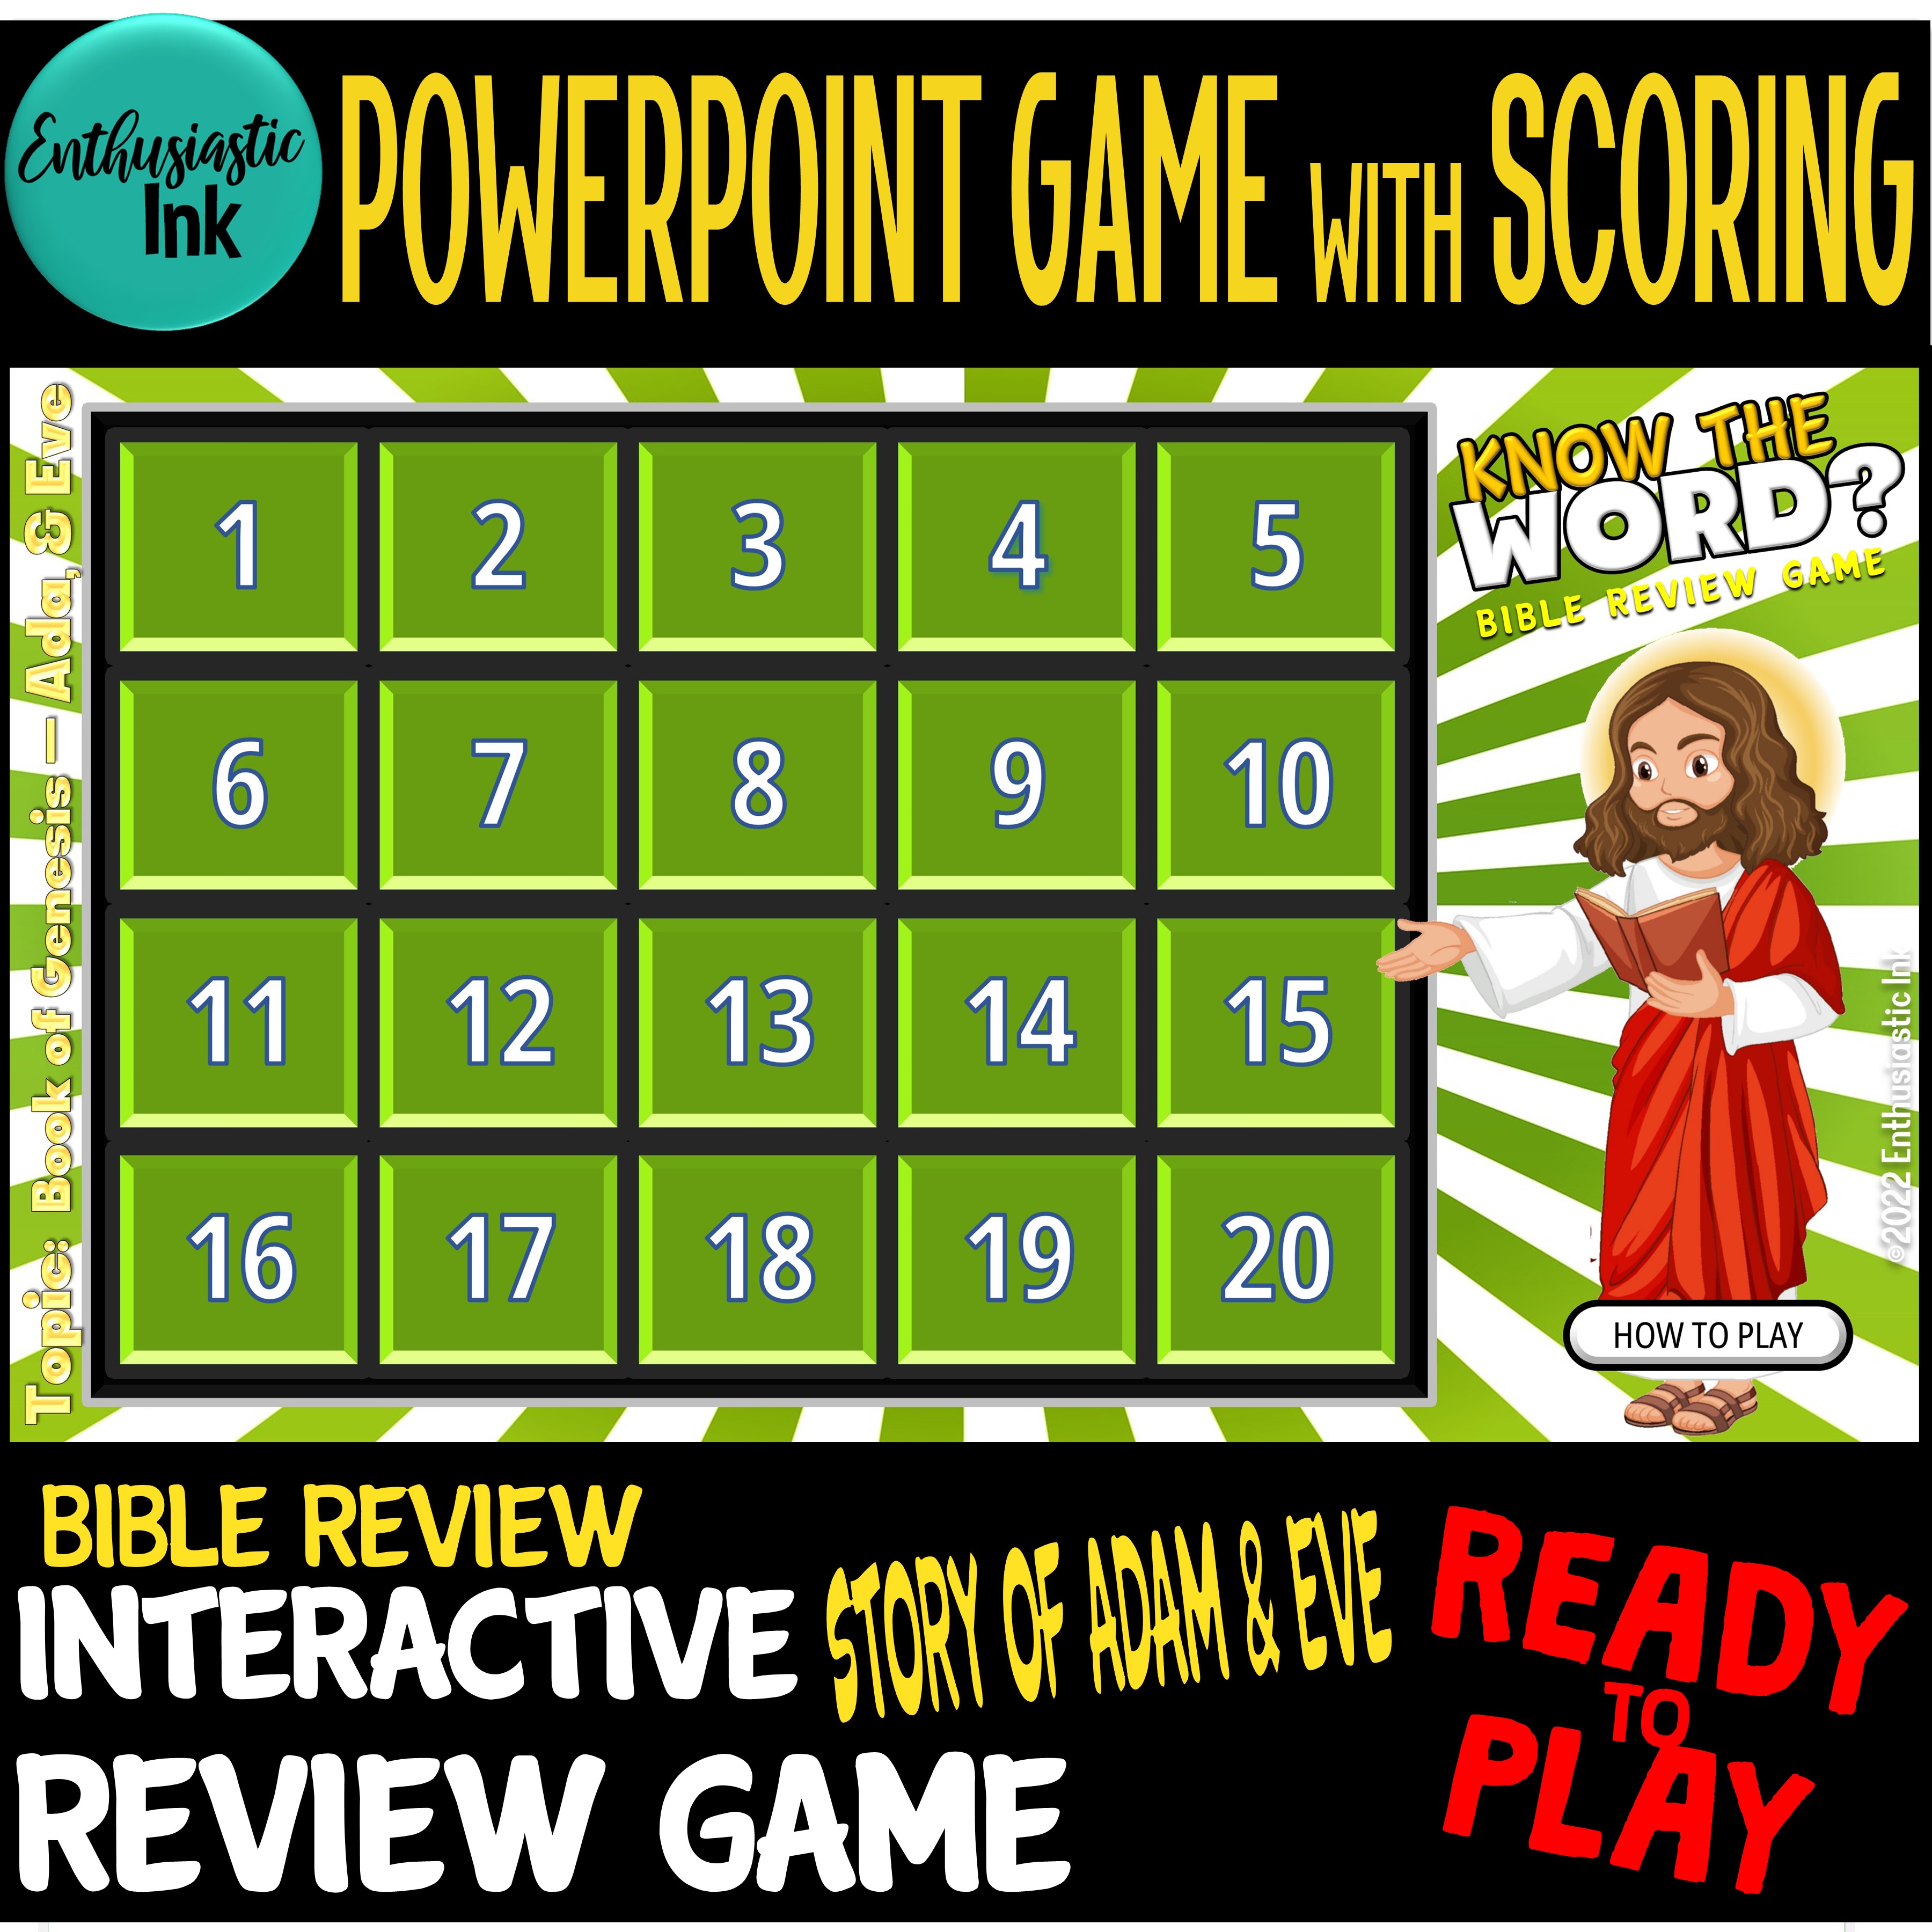 KNOW THE WORD? BIBLE REVIEW GAME -ADAM & EVE